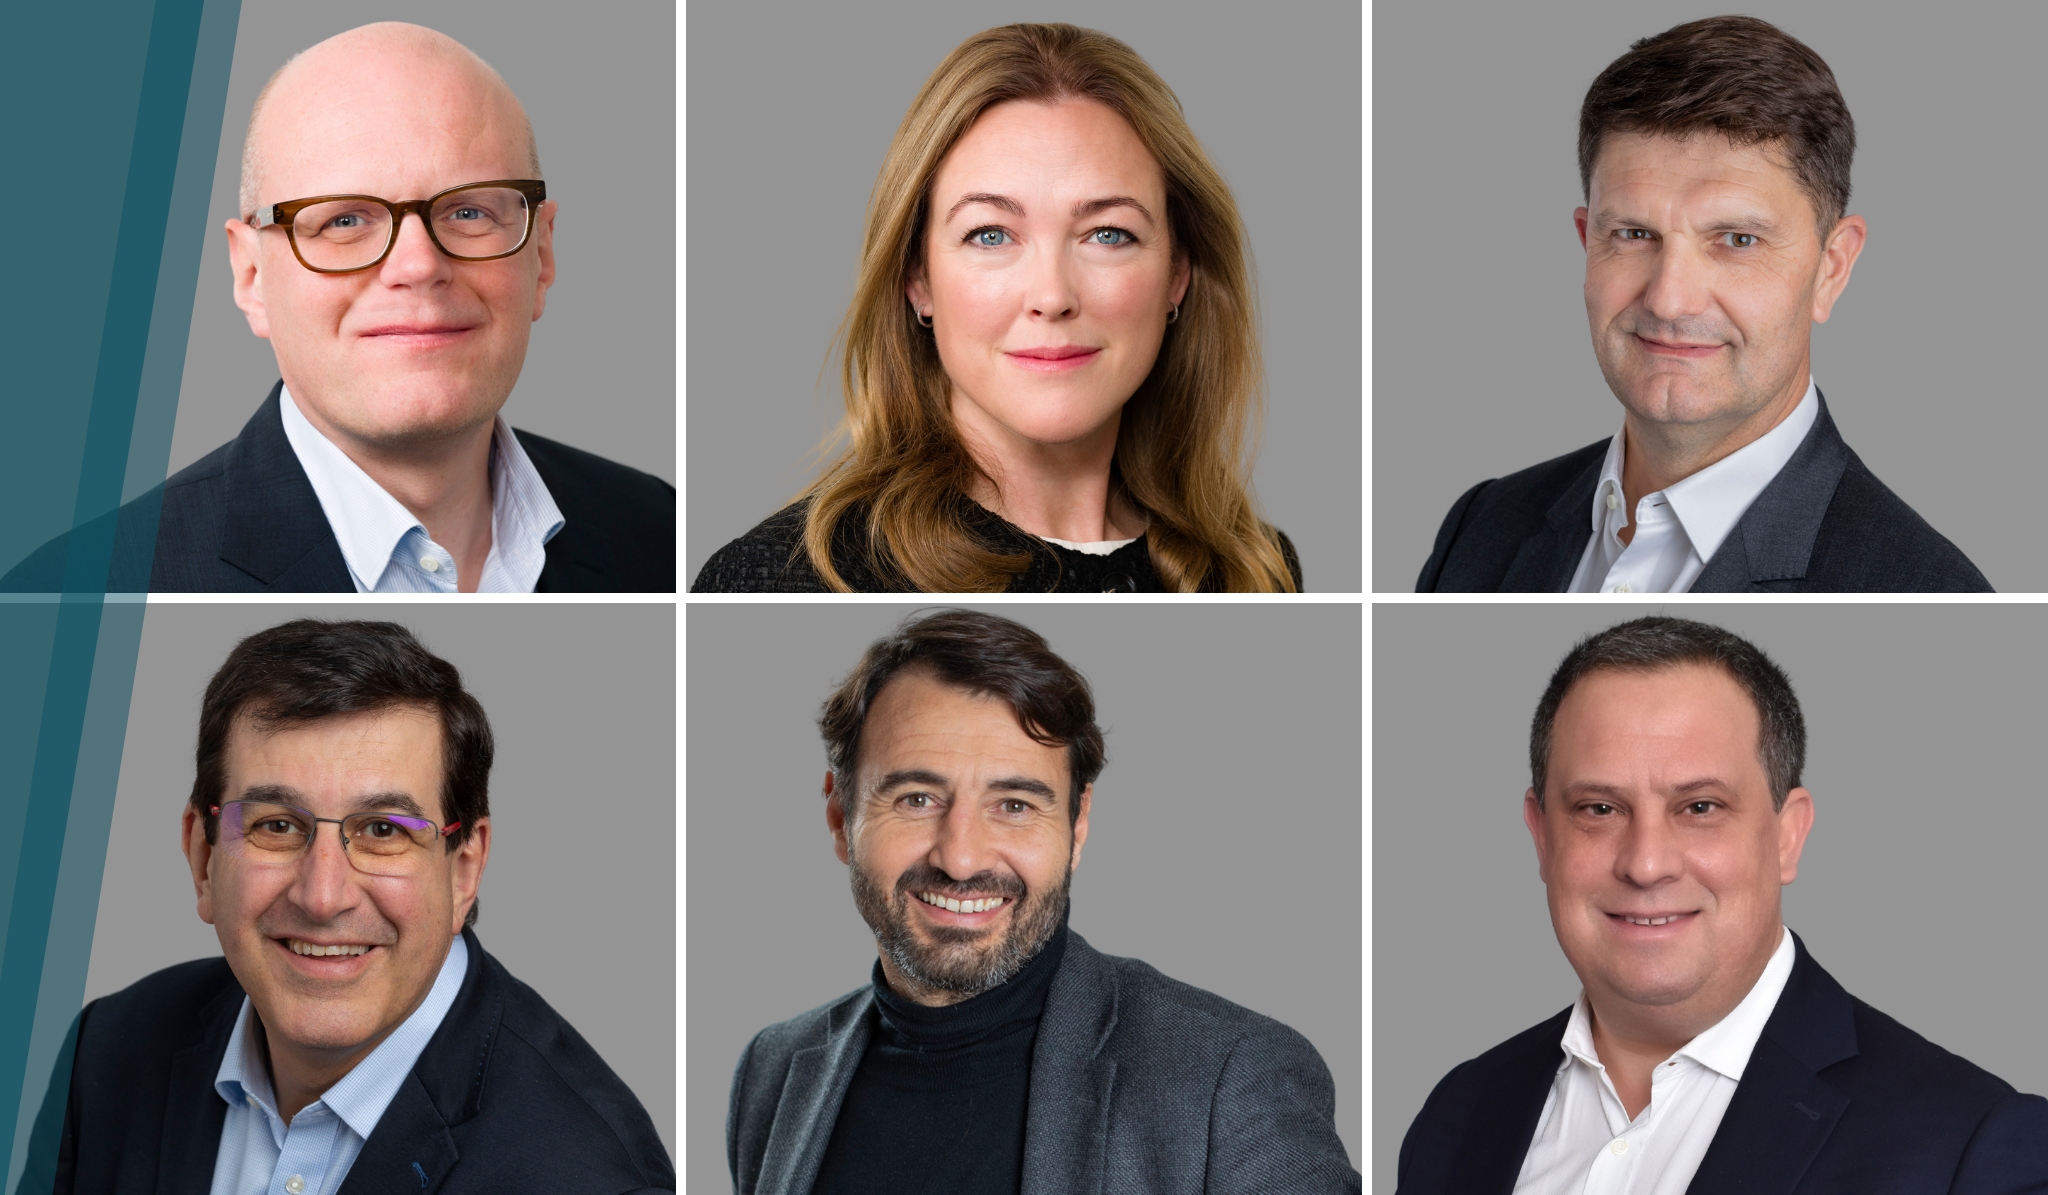 Valtus accelerates its international expansion with a new leadership team